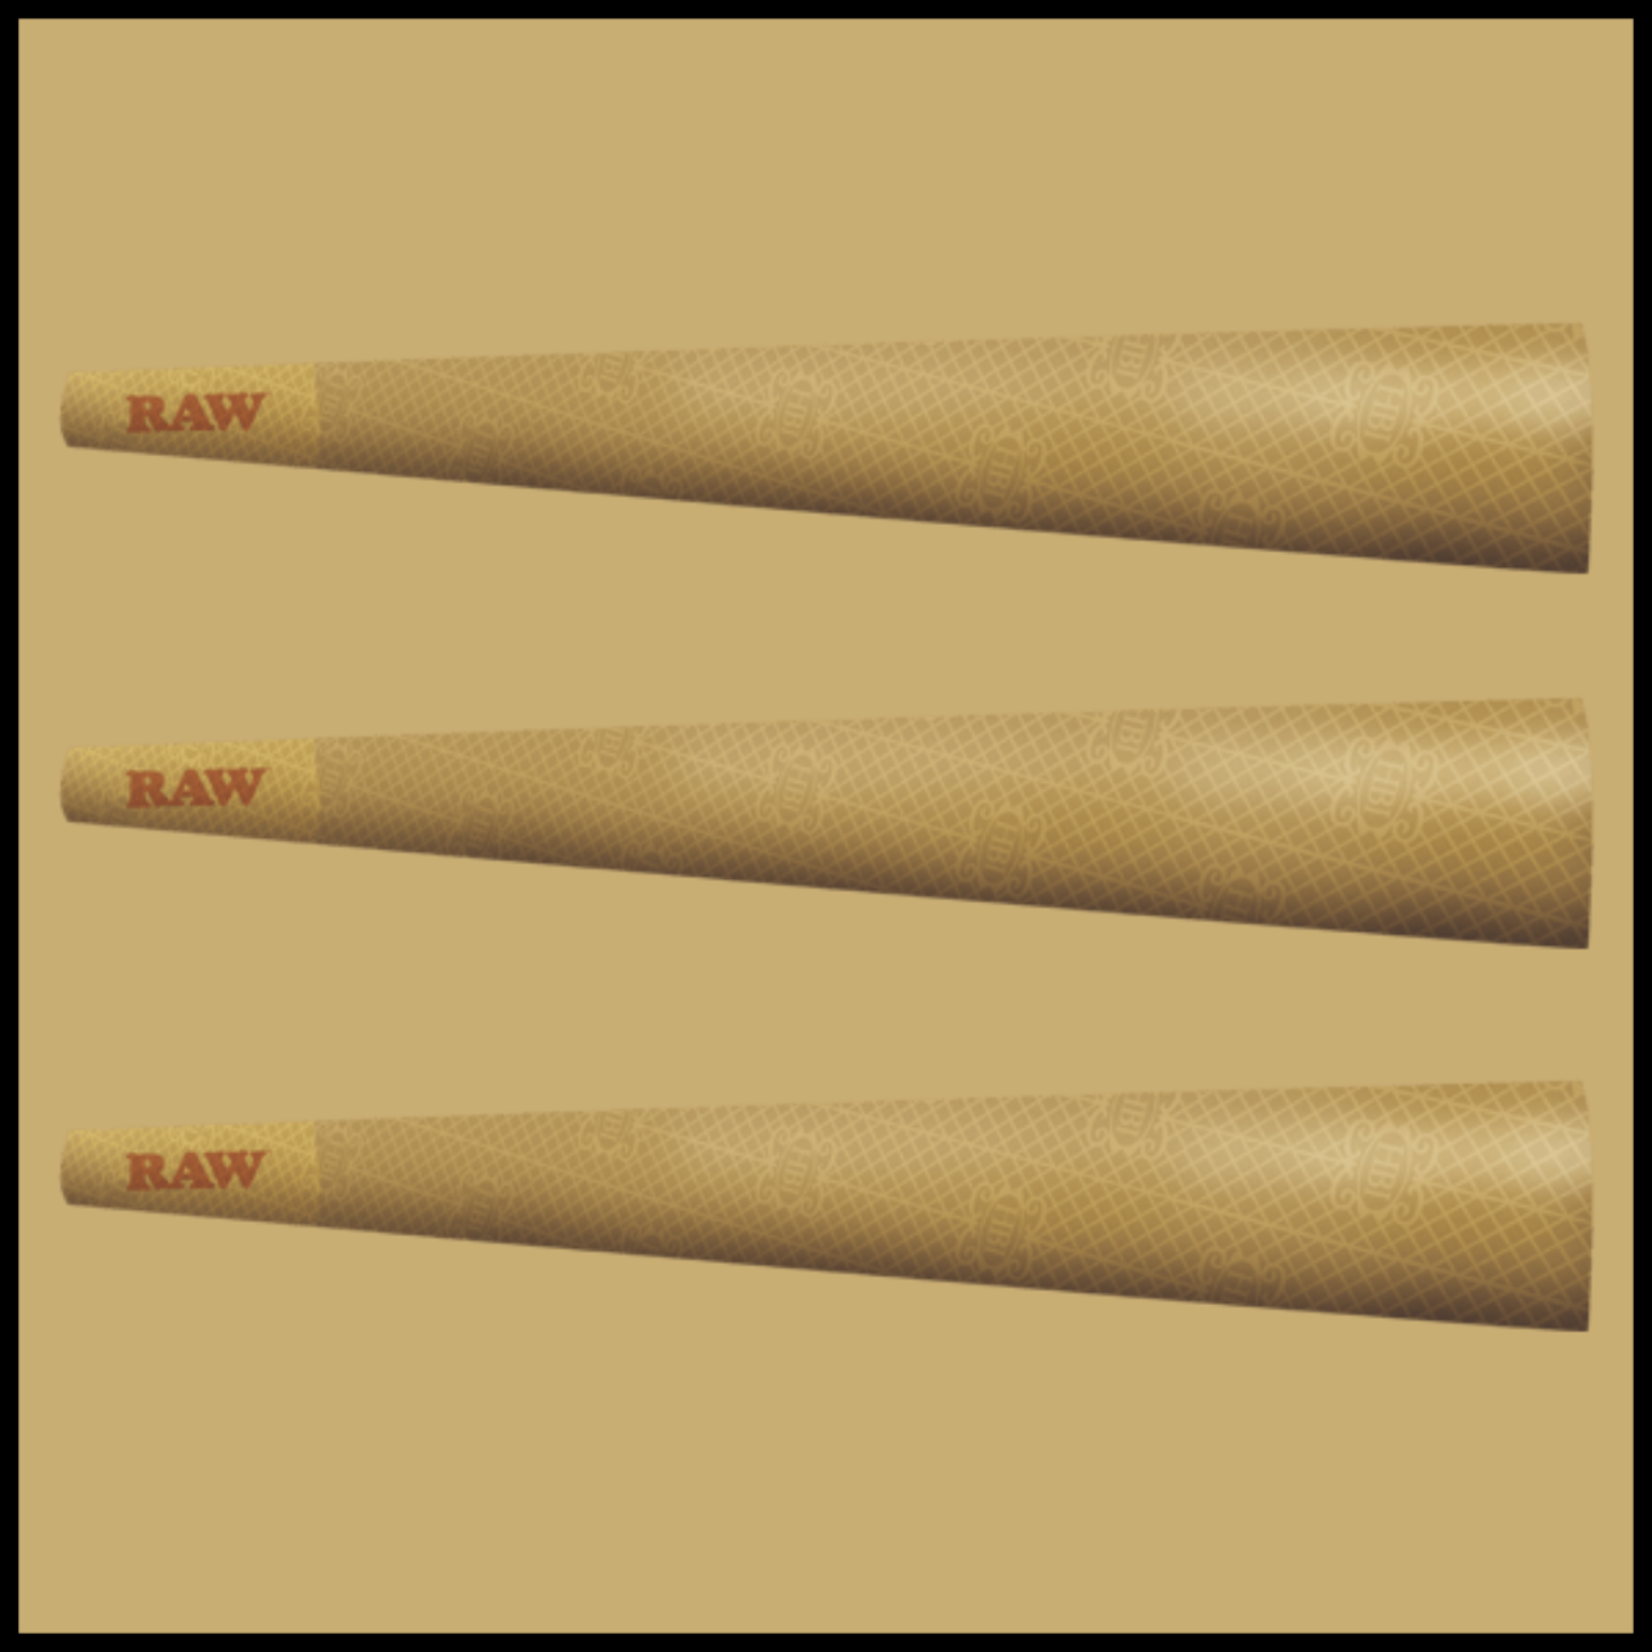 RAW RAW Classic King Size Cones - 3ct